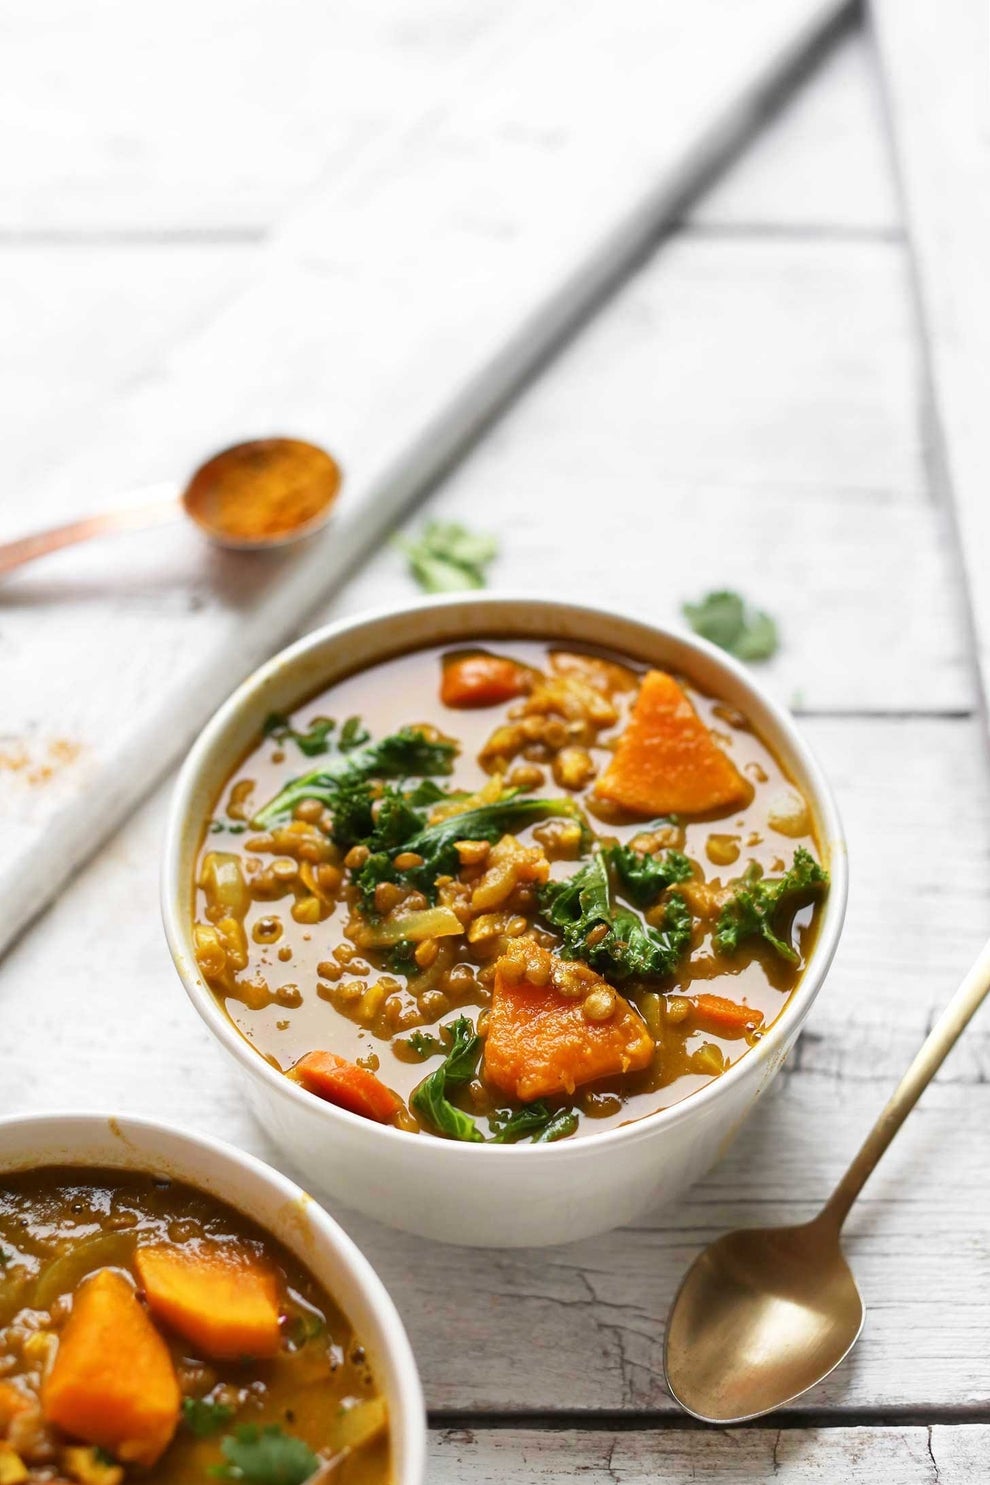 59 Healthy Soup Recipes That Are Cozy & Nutritious